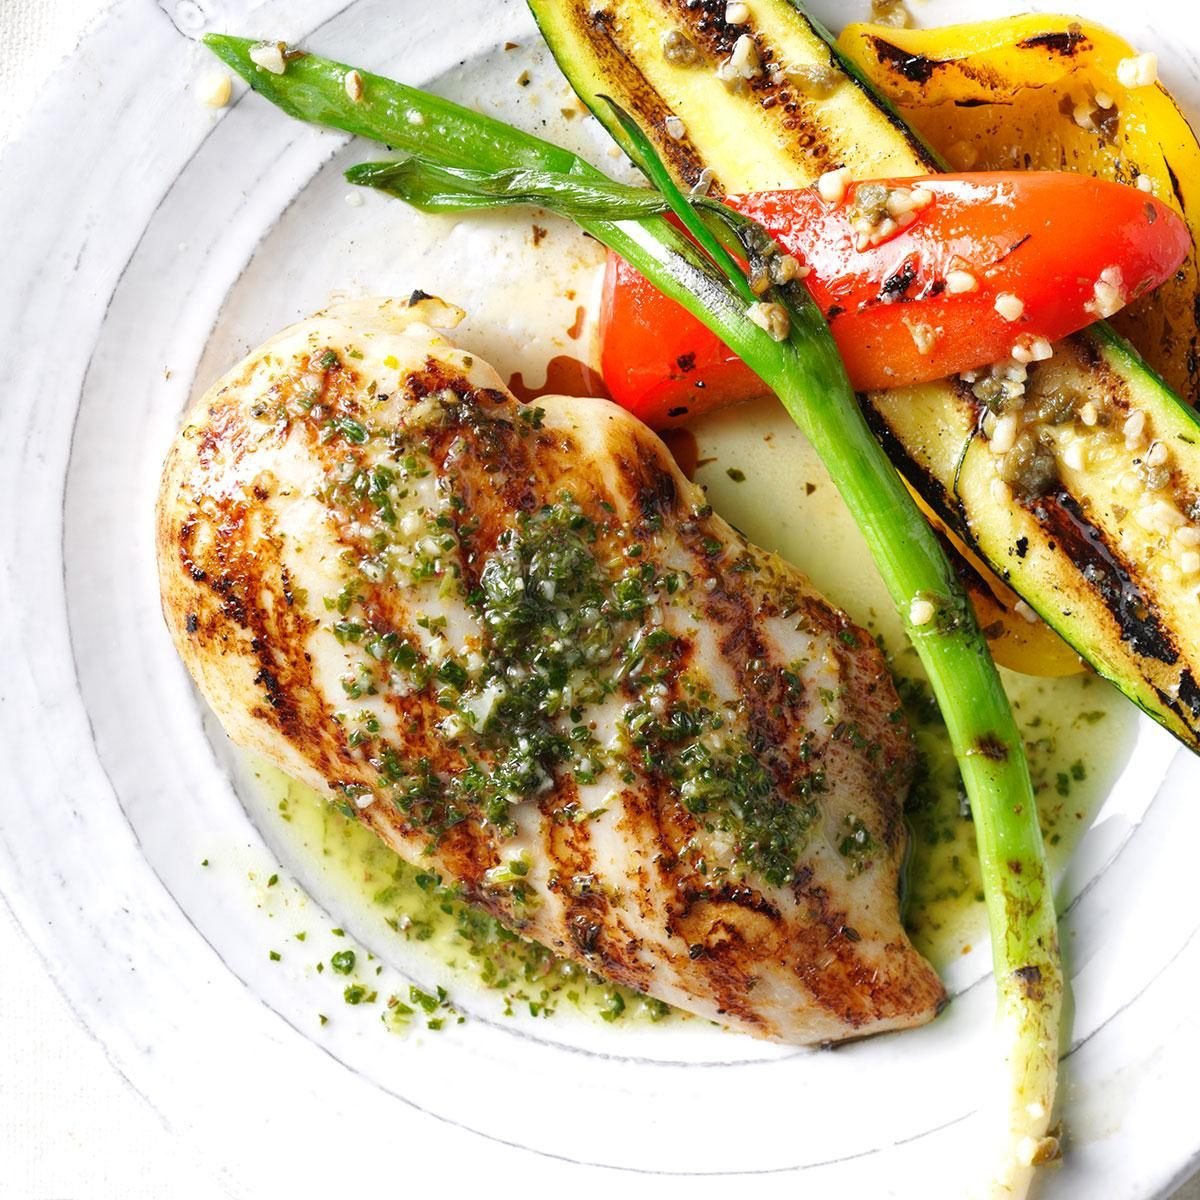 Chicken with Citrus Chimichurri Sauce Recipe: How to Make It